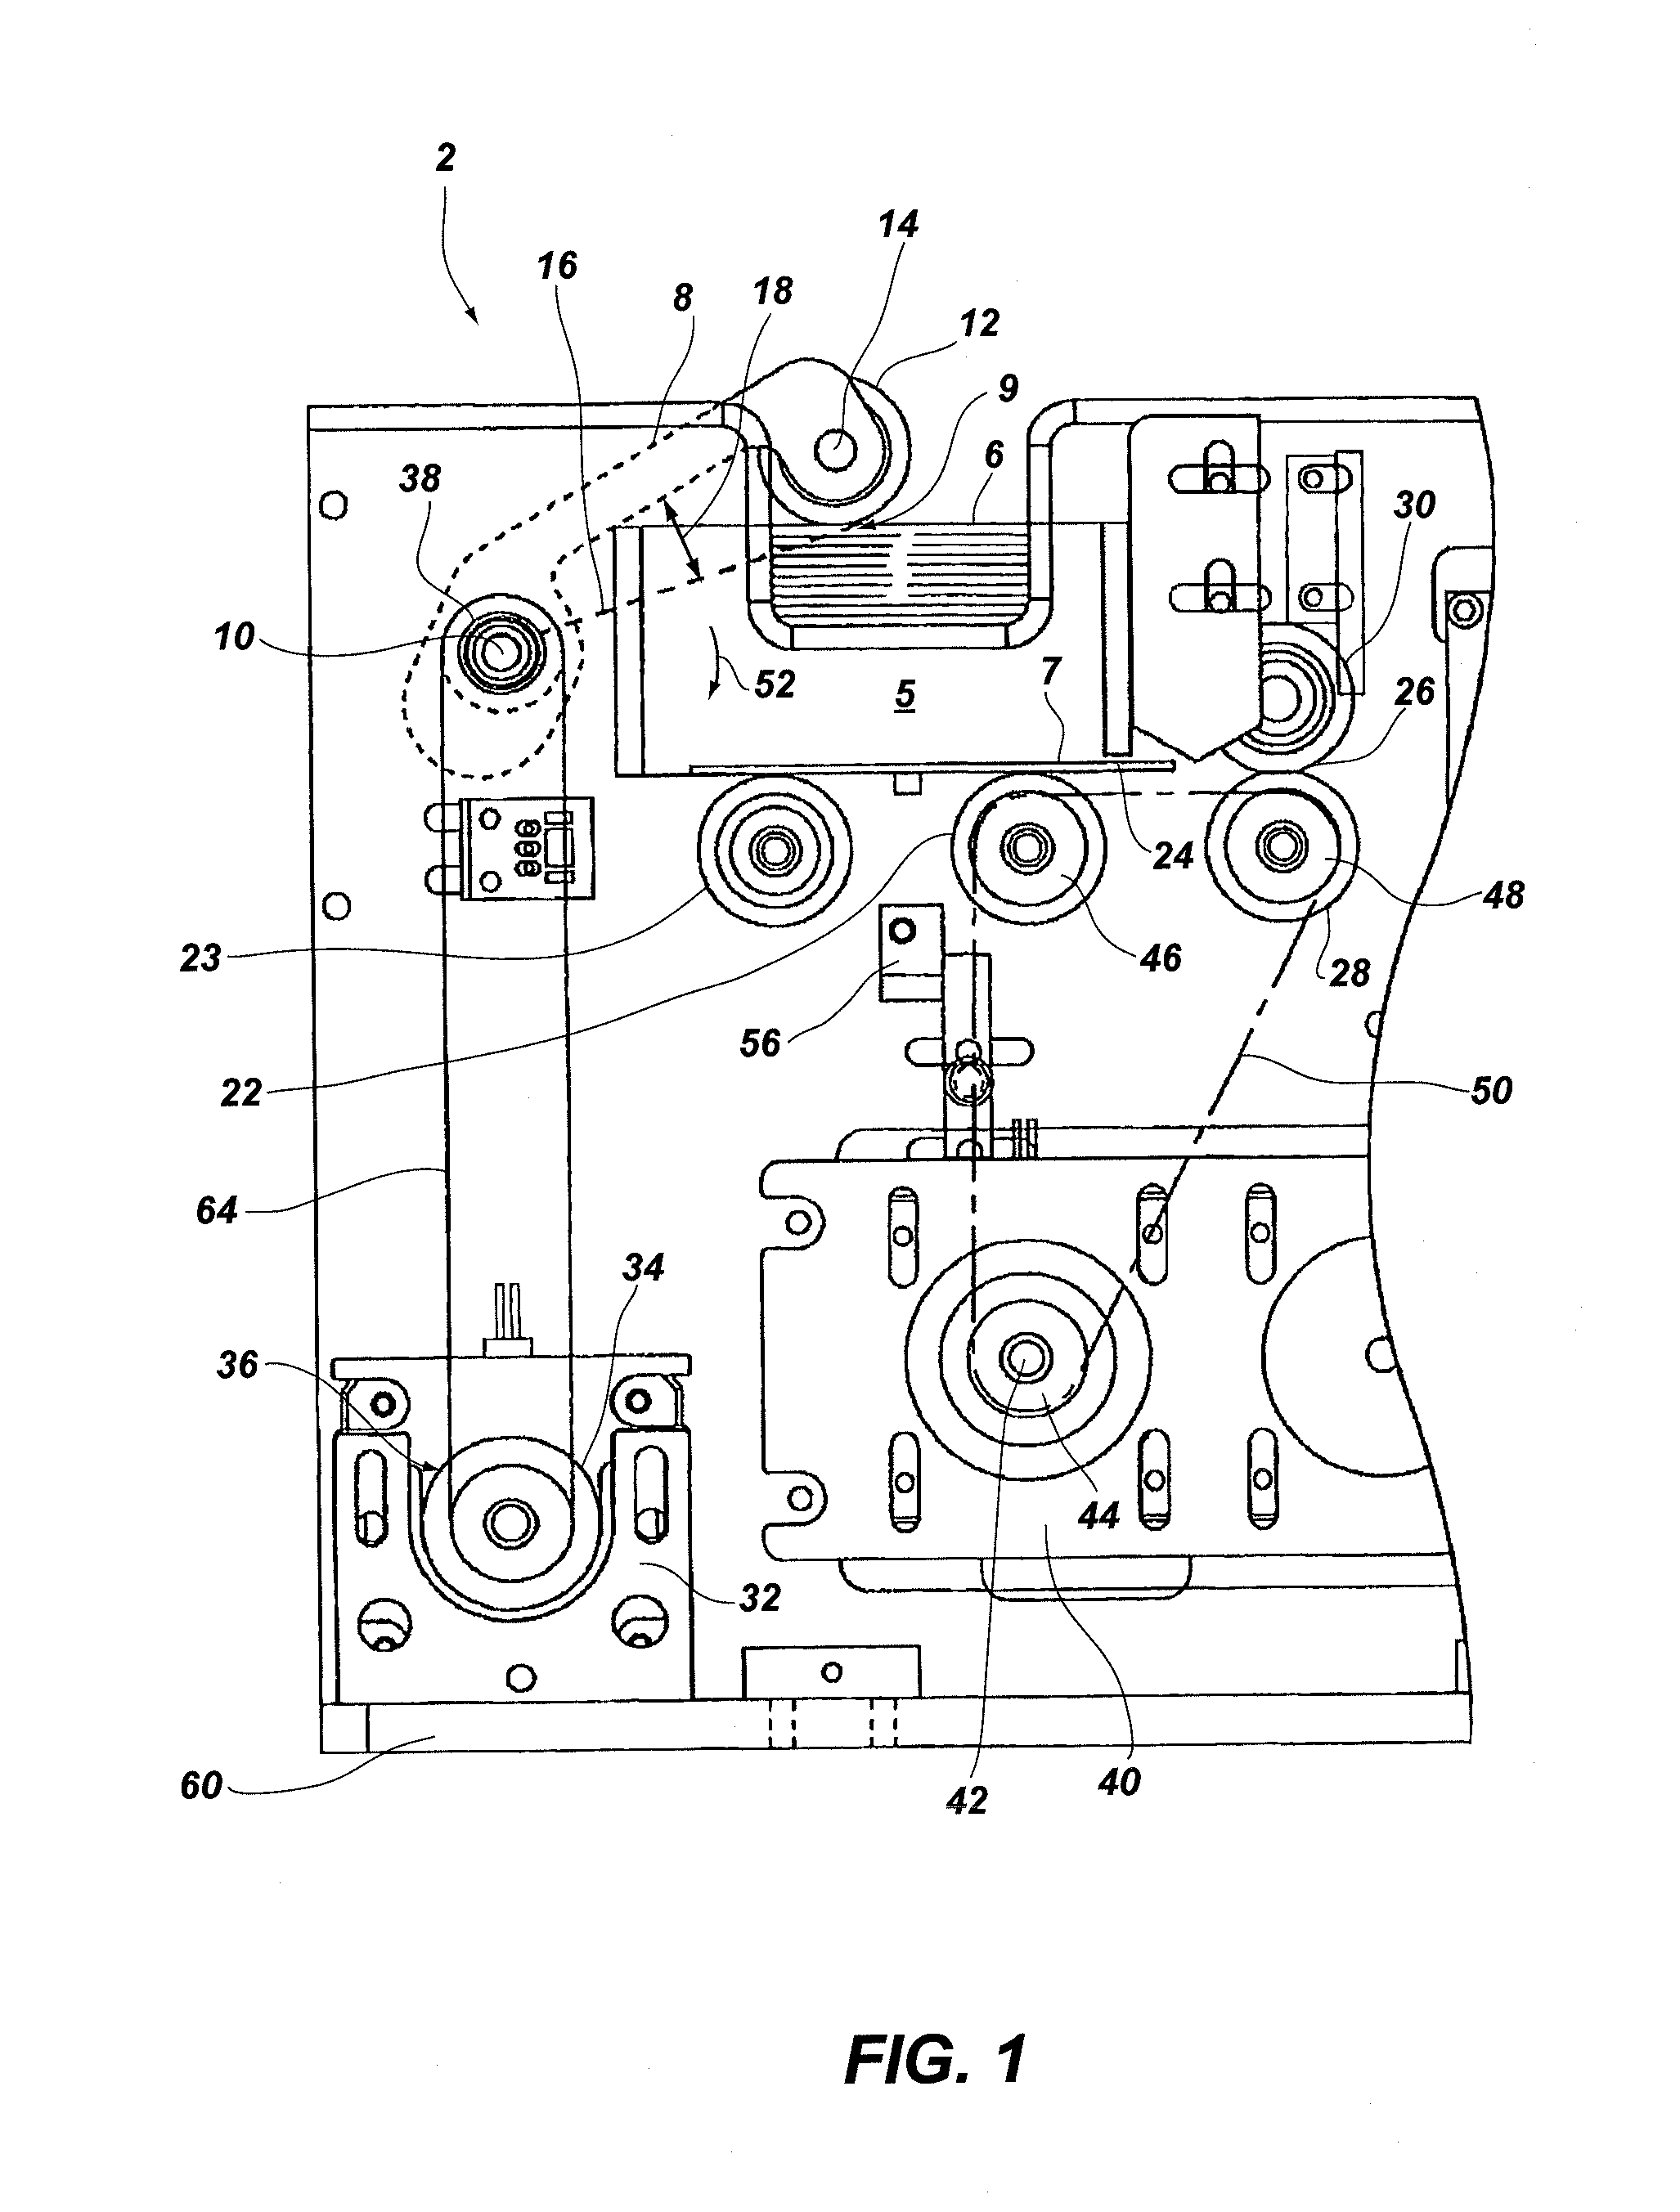 Automatic system and methods for accurate card handling